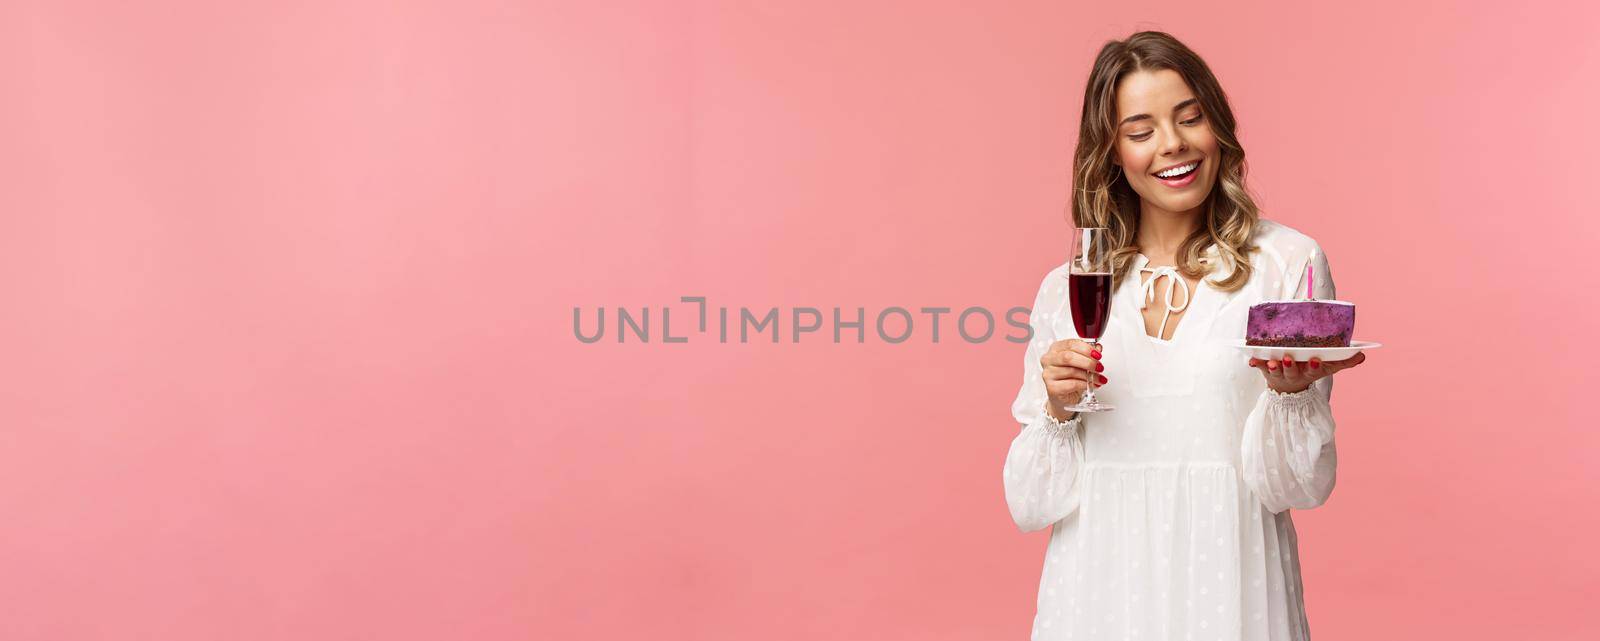 Holidays, spring and party concept. Portrait of tender, elegant young blond woman holding glass of wine and cake with lit candle, smiling pleased, celebrating birthday, pink background.